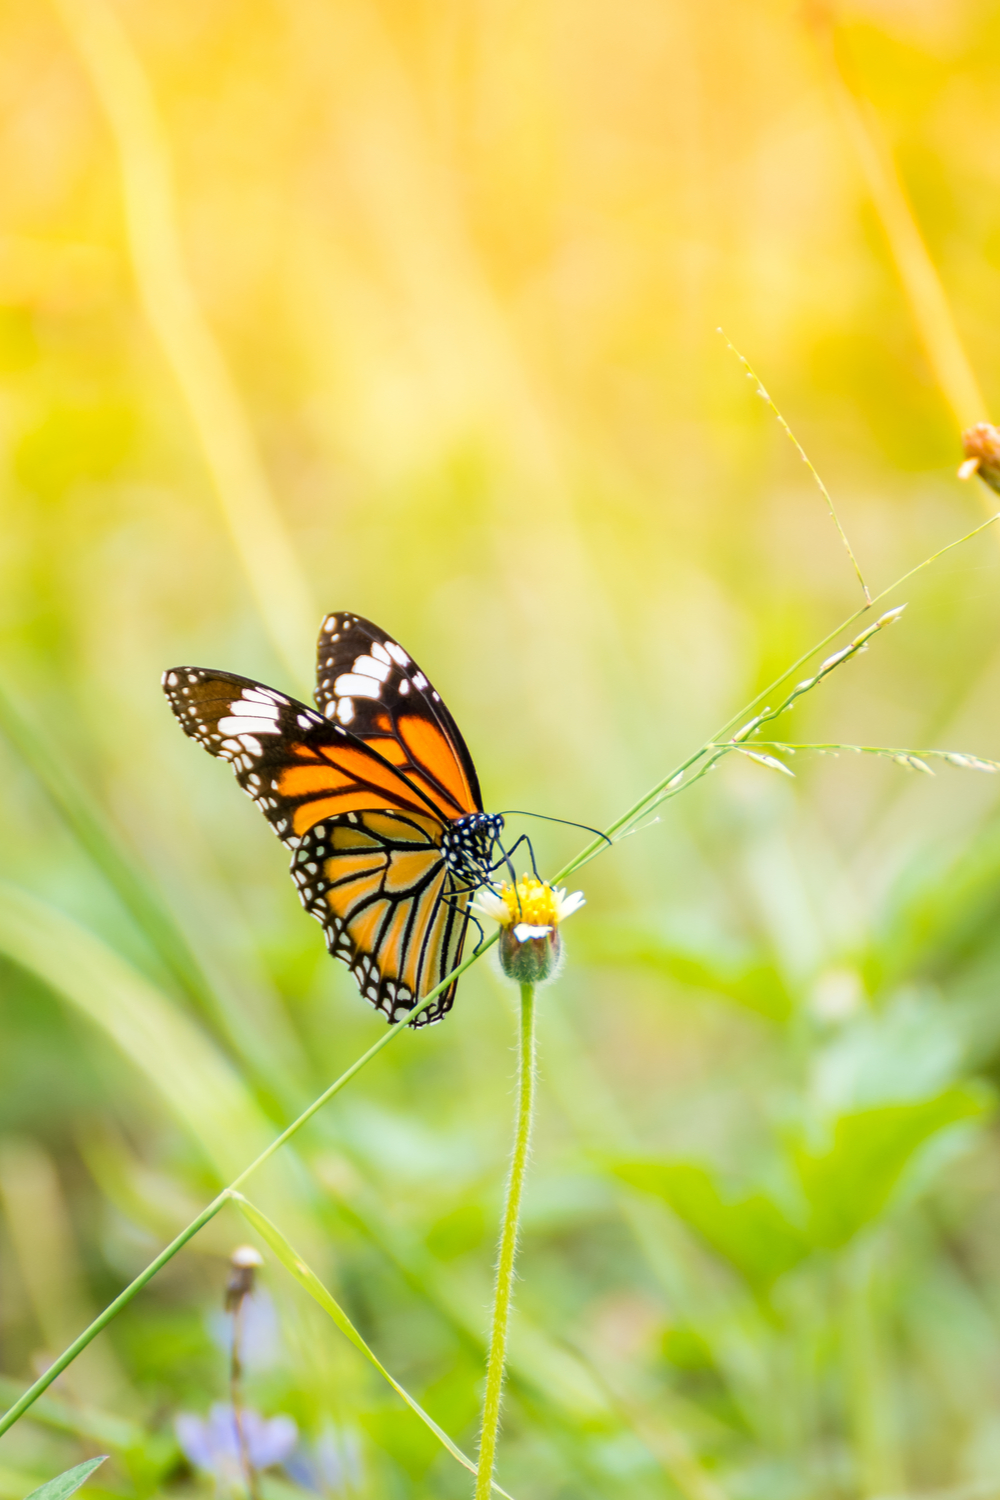 What does it mean if you see a monarch butterfly